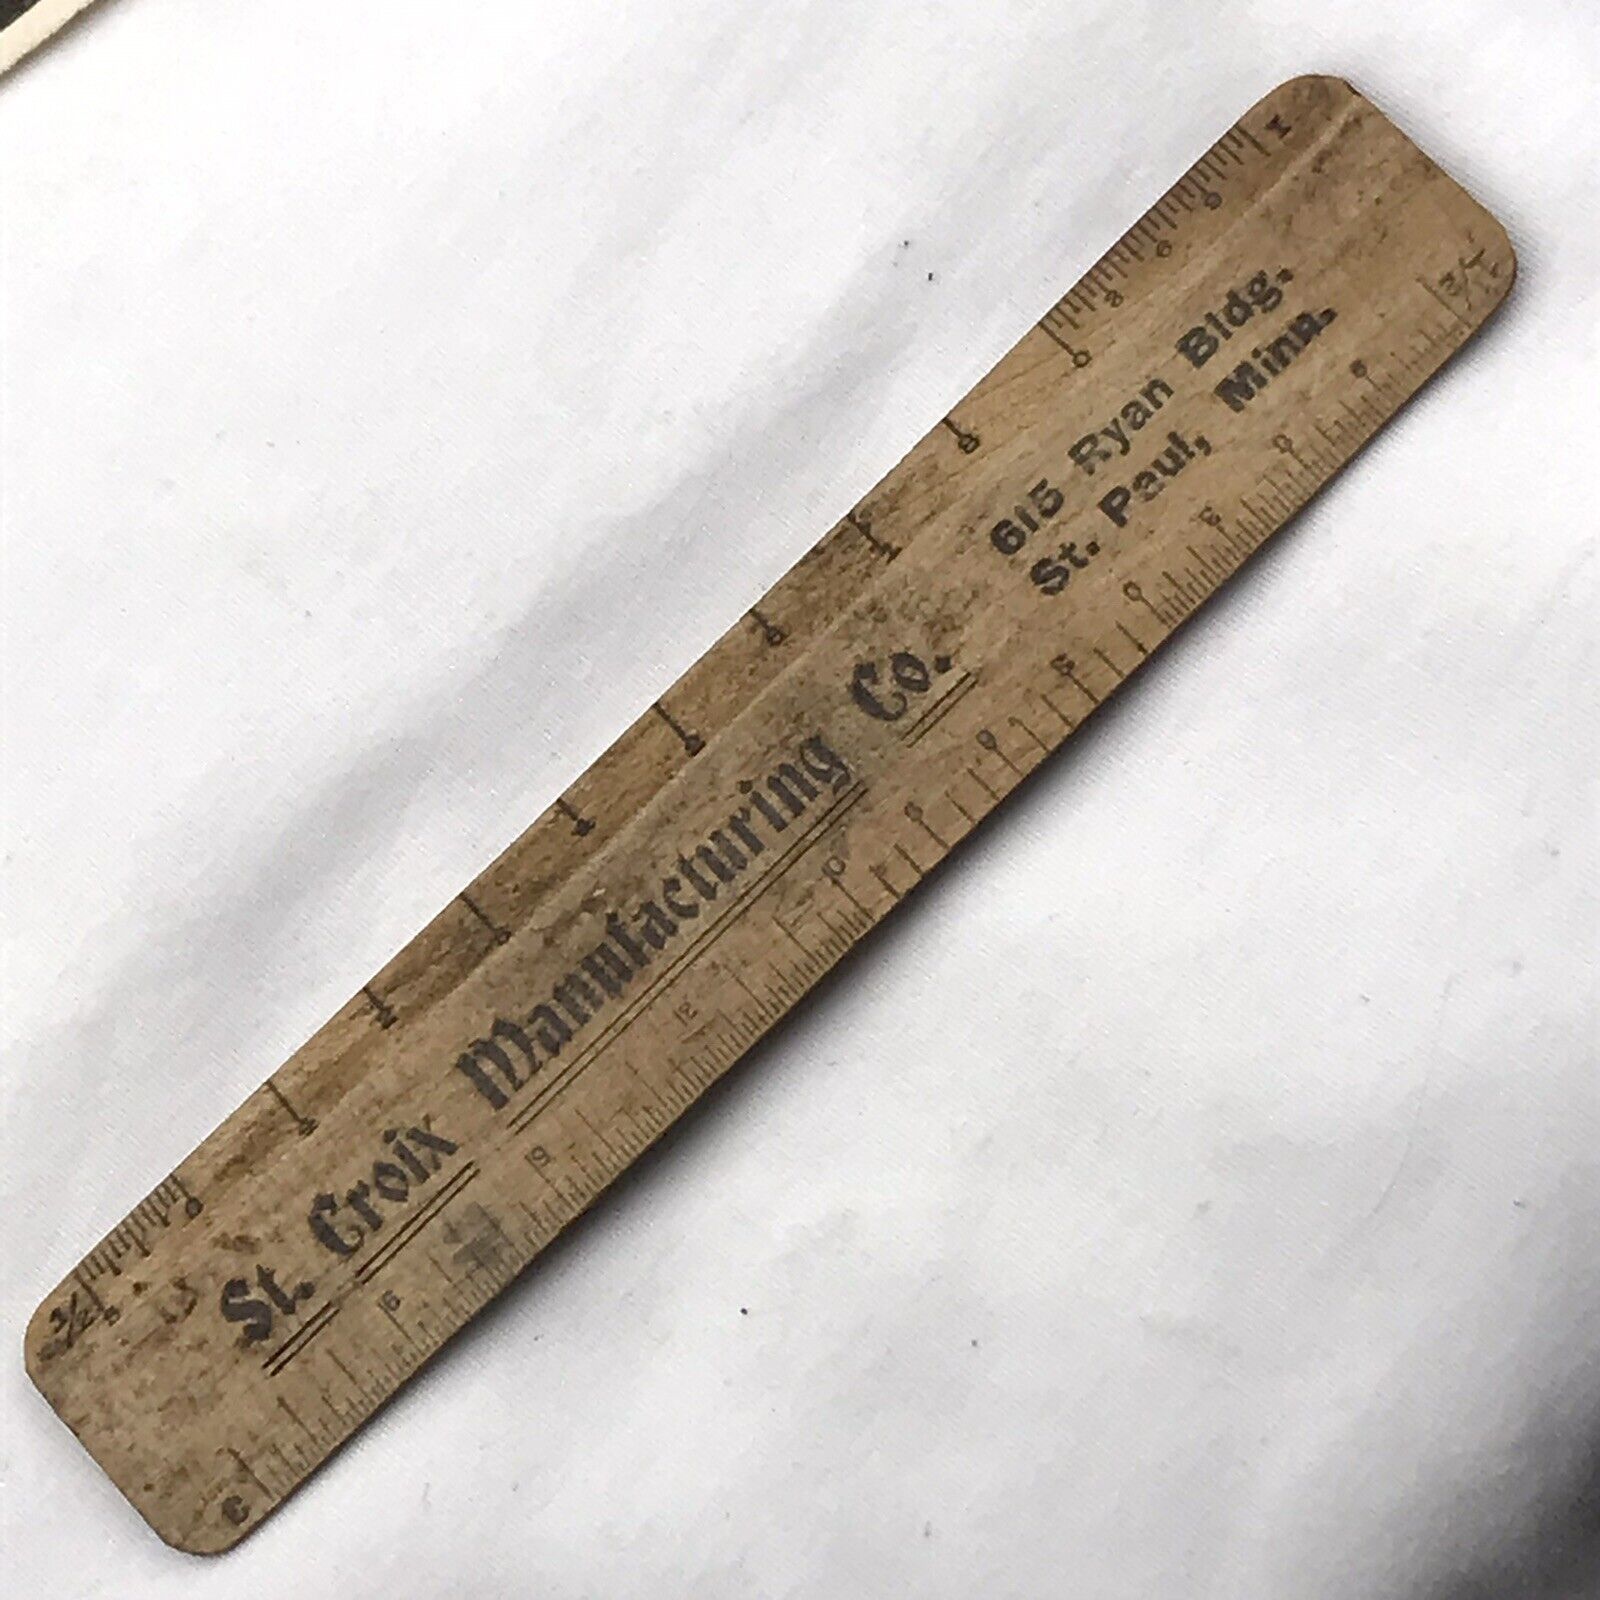 St Croix Manufacturing Company Advertising Ruler Vintage St Paul Minnesota